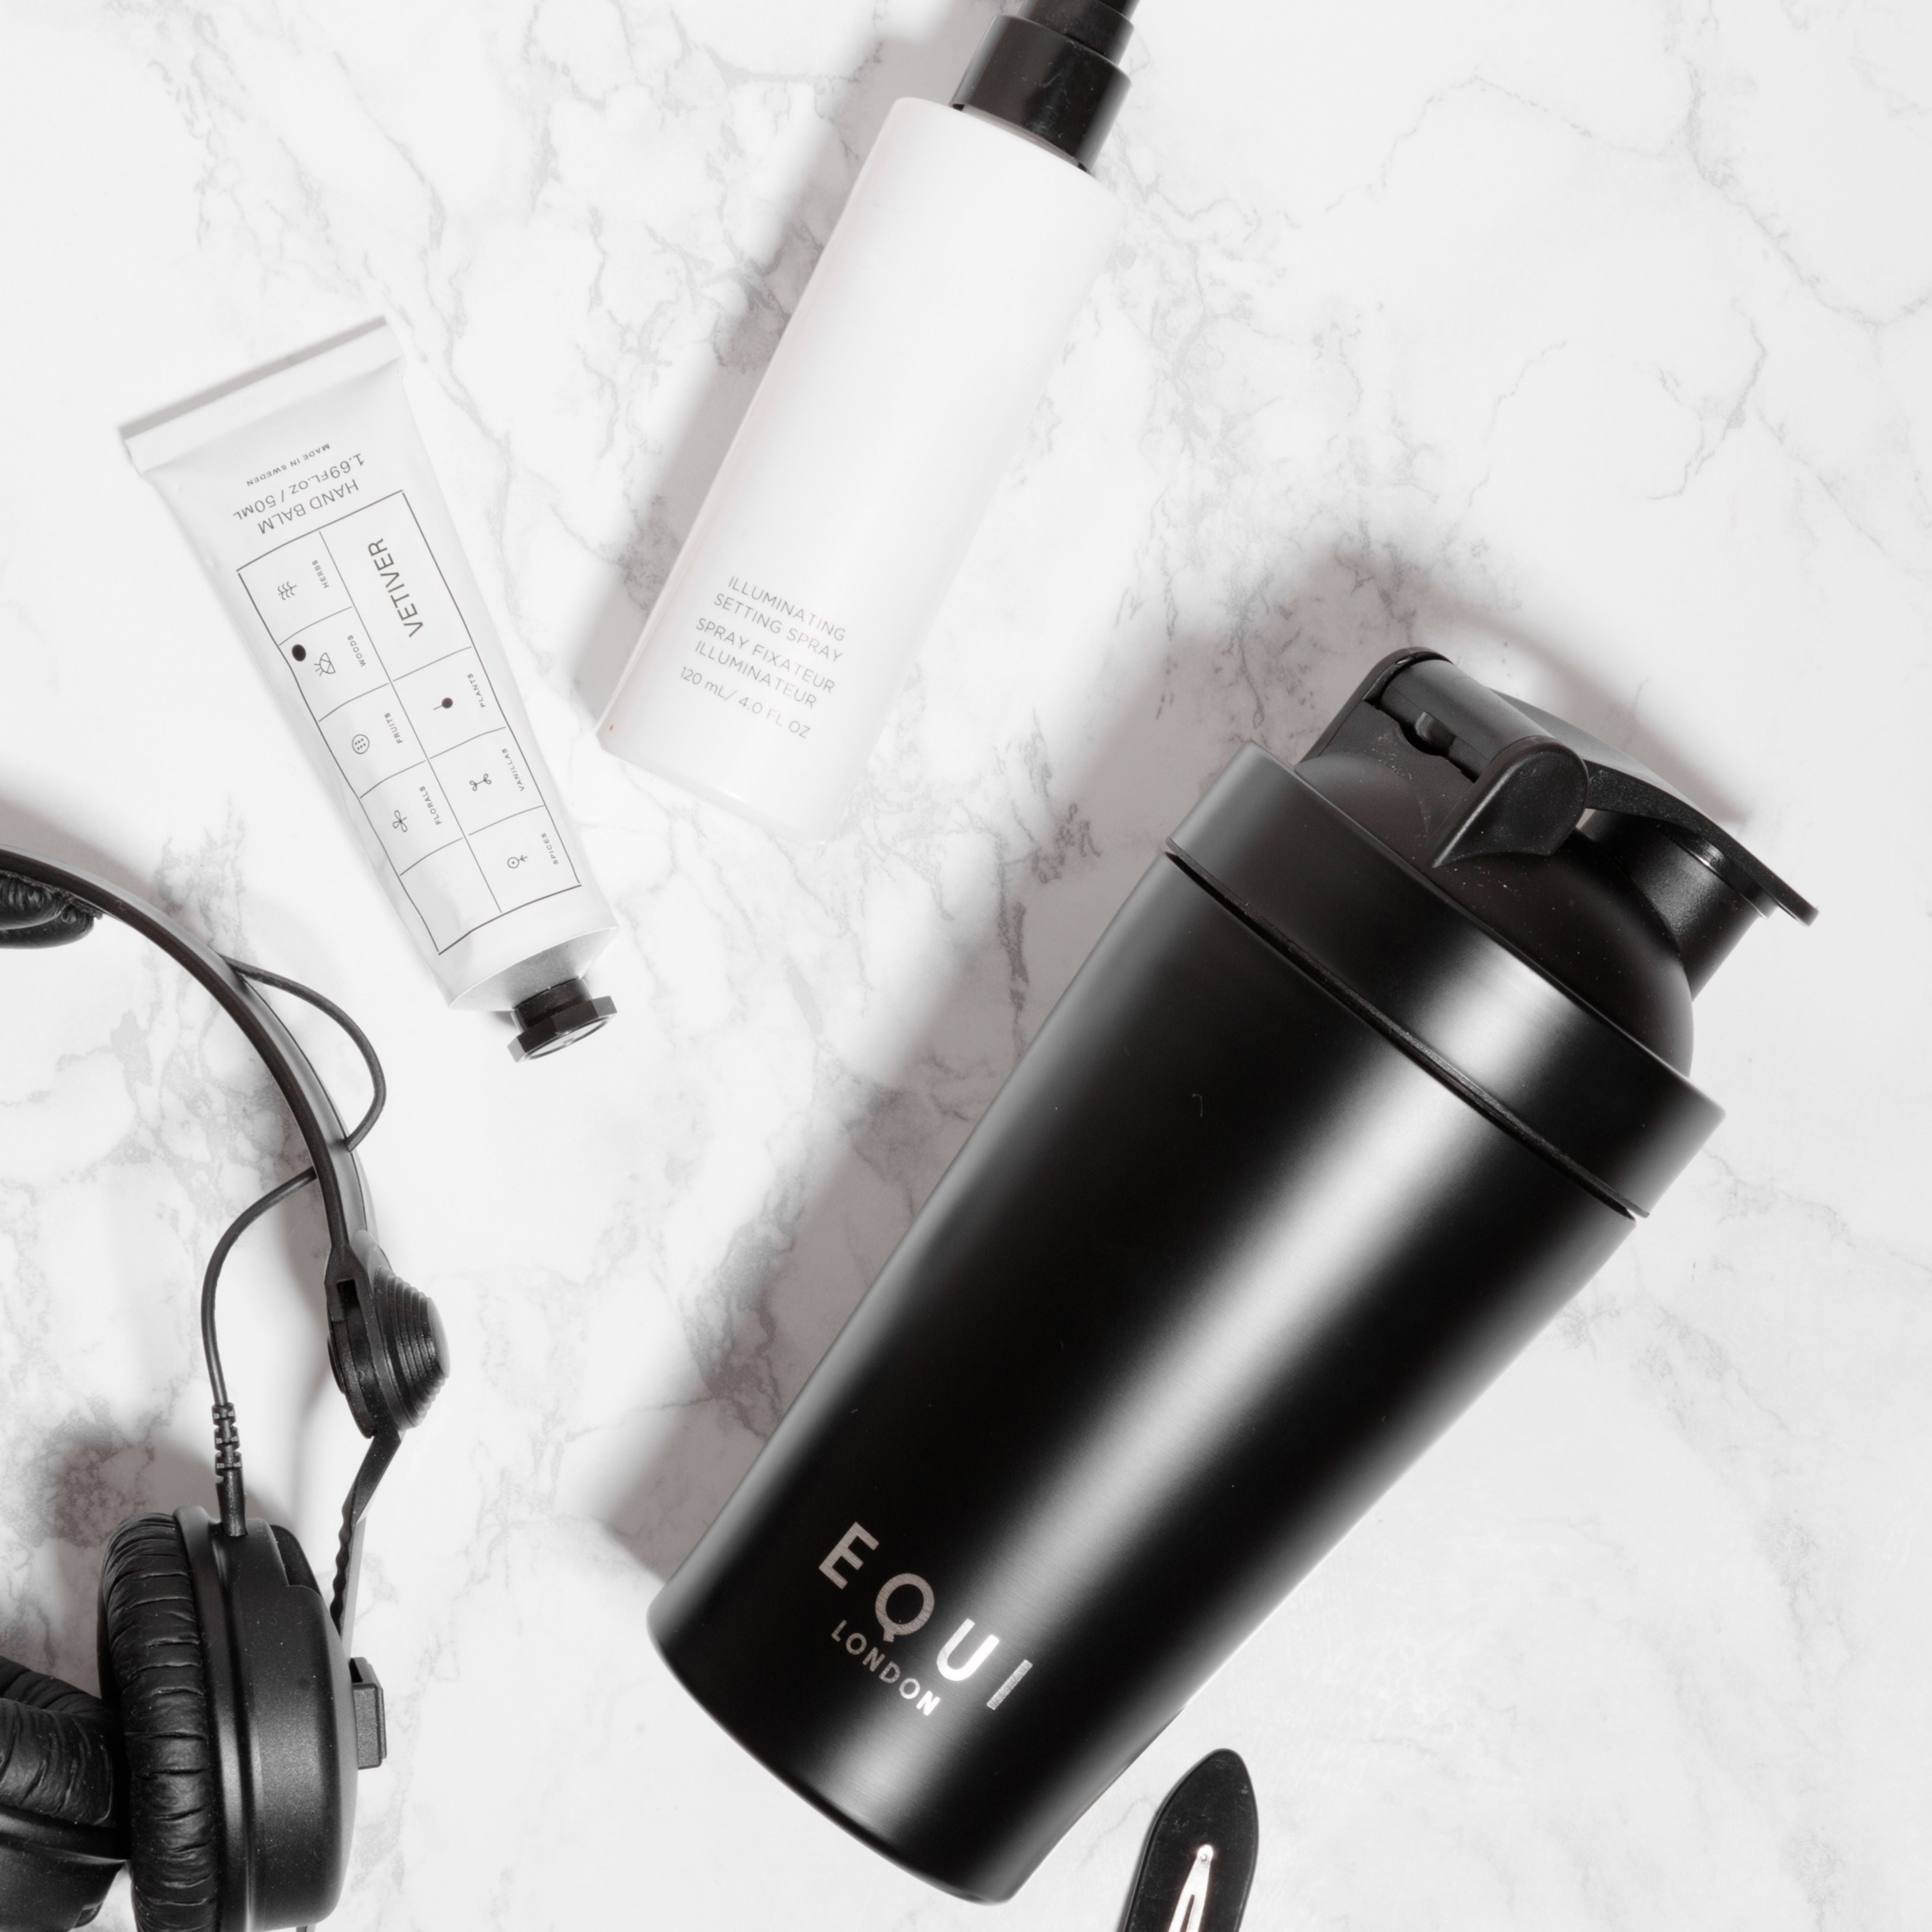  Equi Shaker with headphones and cosmetics on a marble background